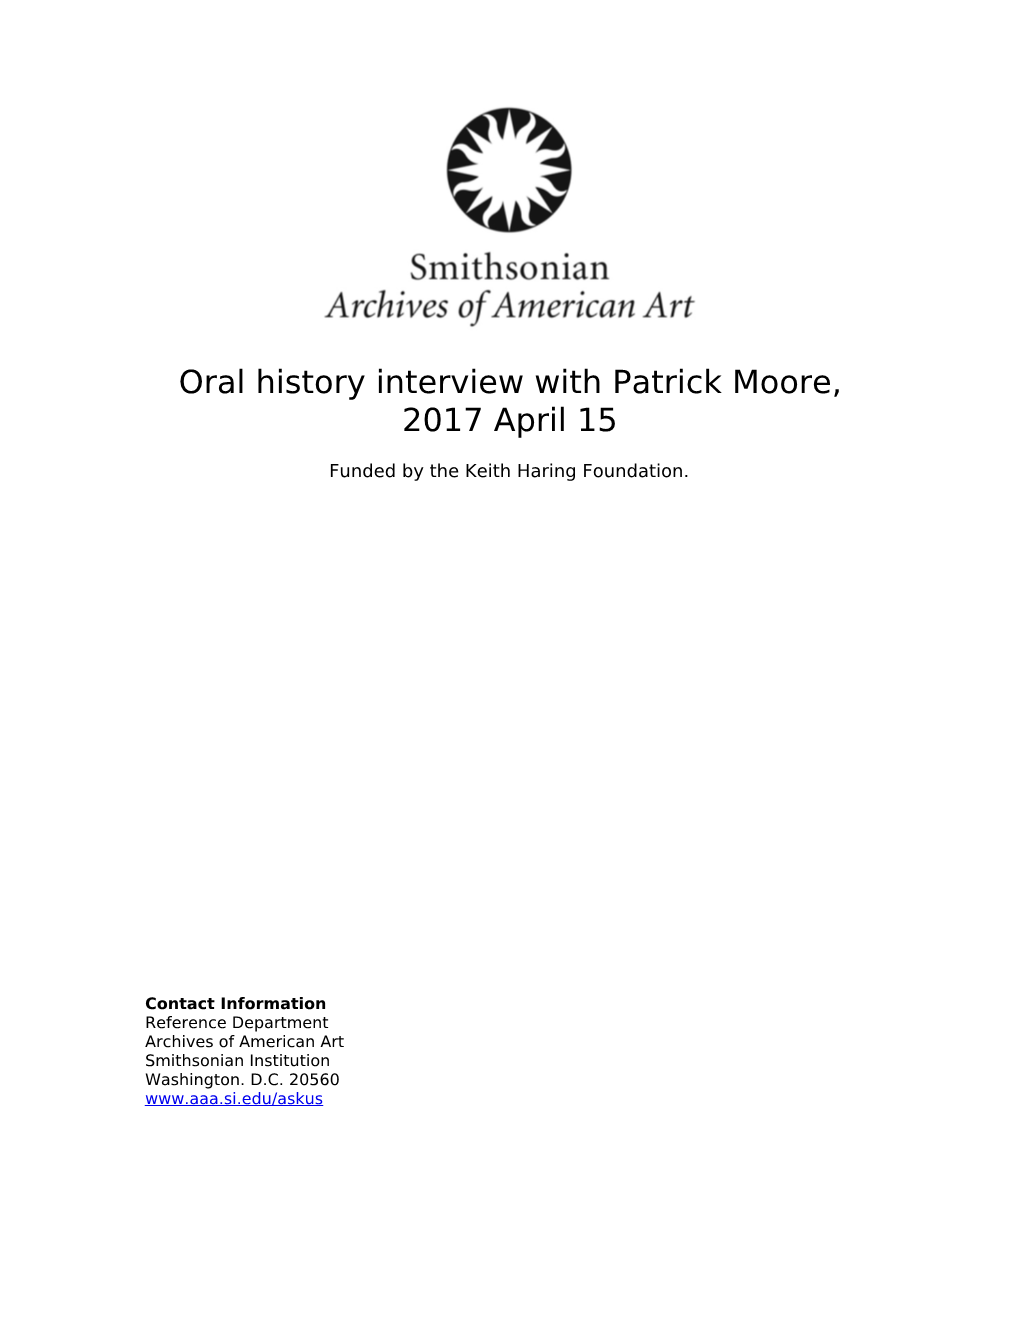 Oral History Interview with Patrick Moore, 2017 April 15